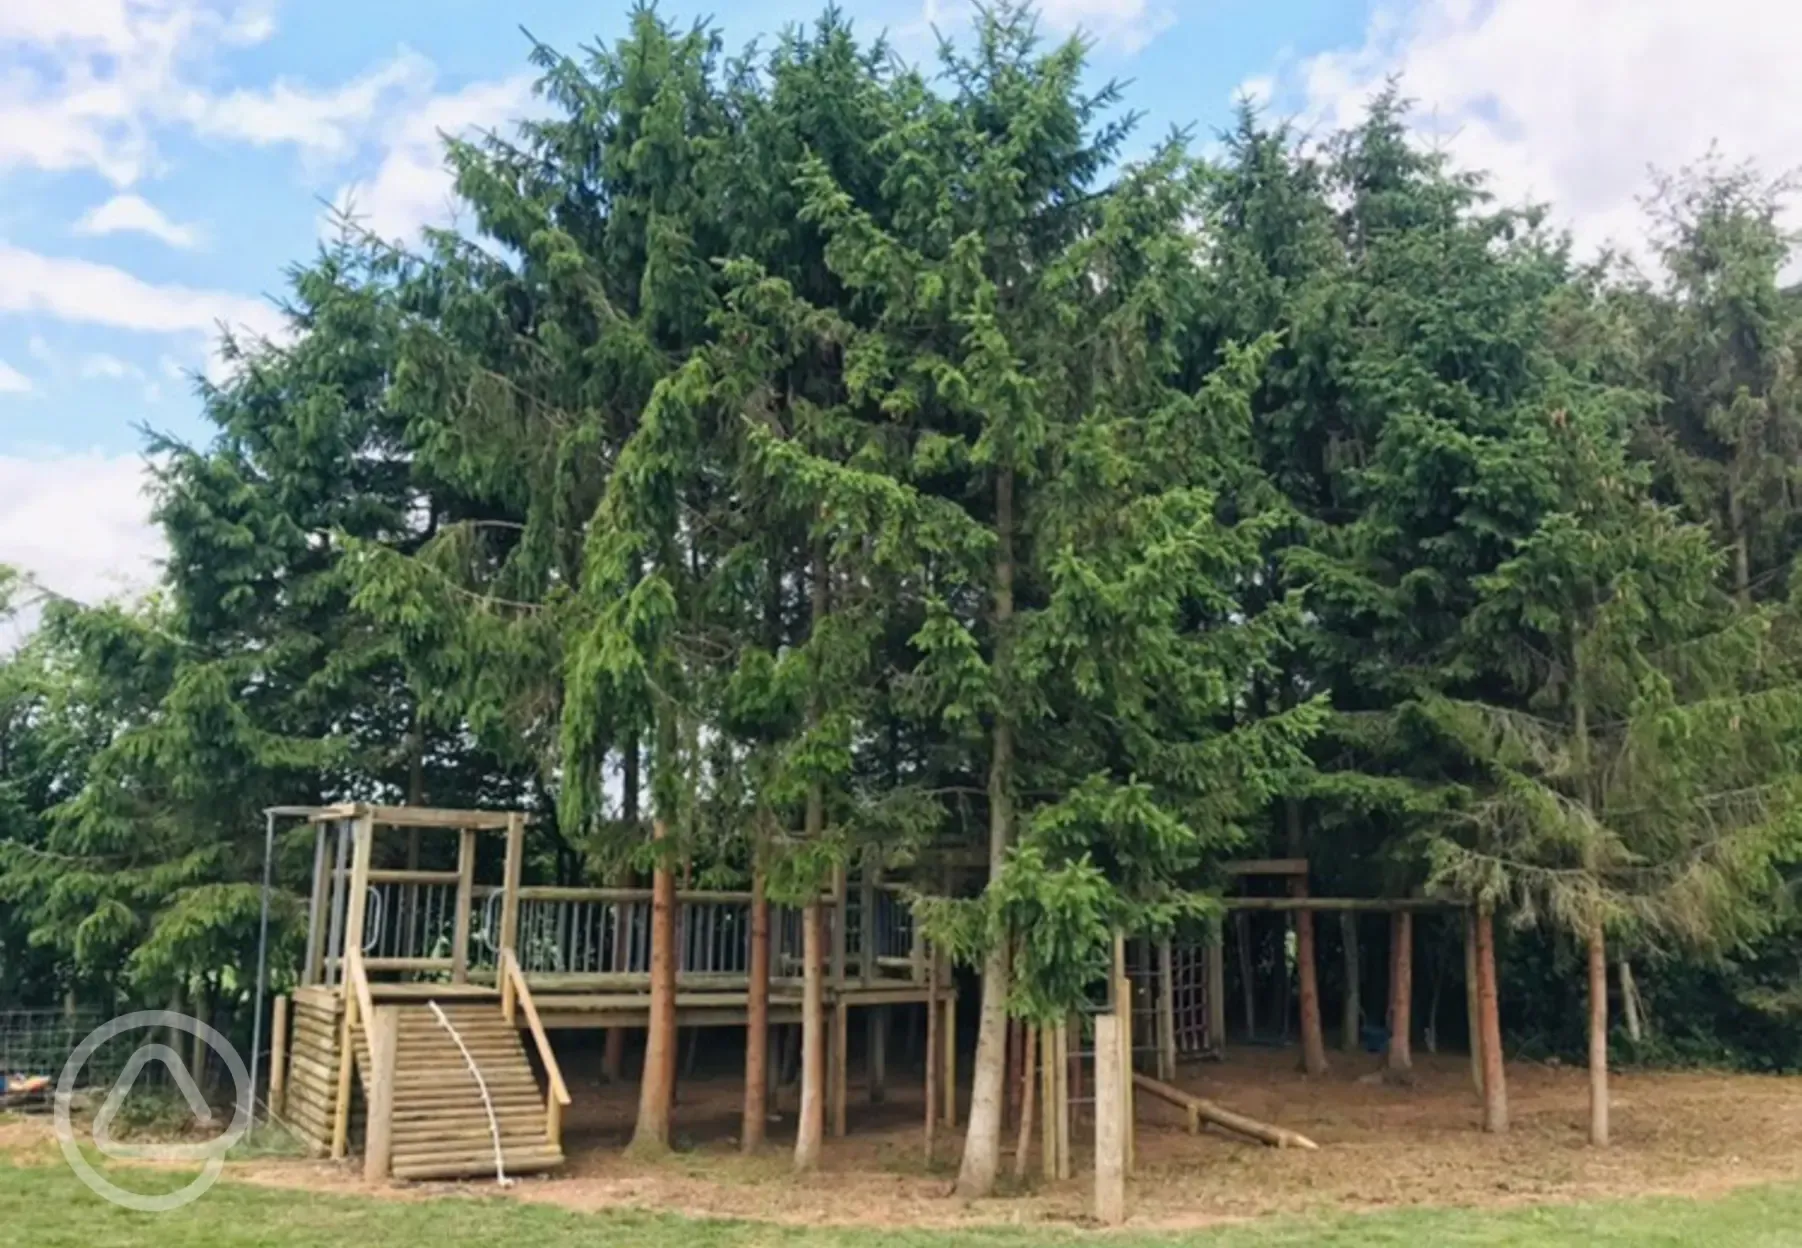 Play area for the children